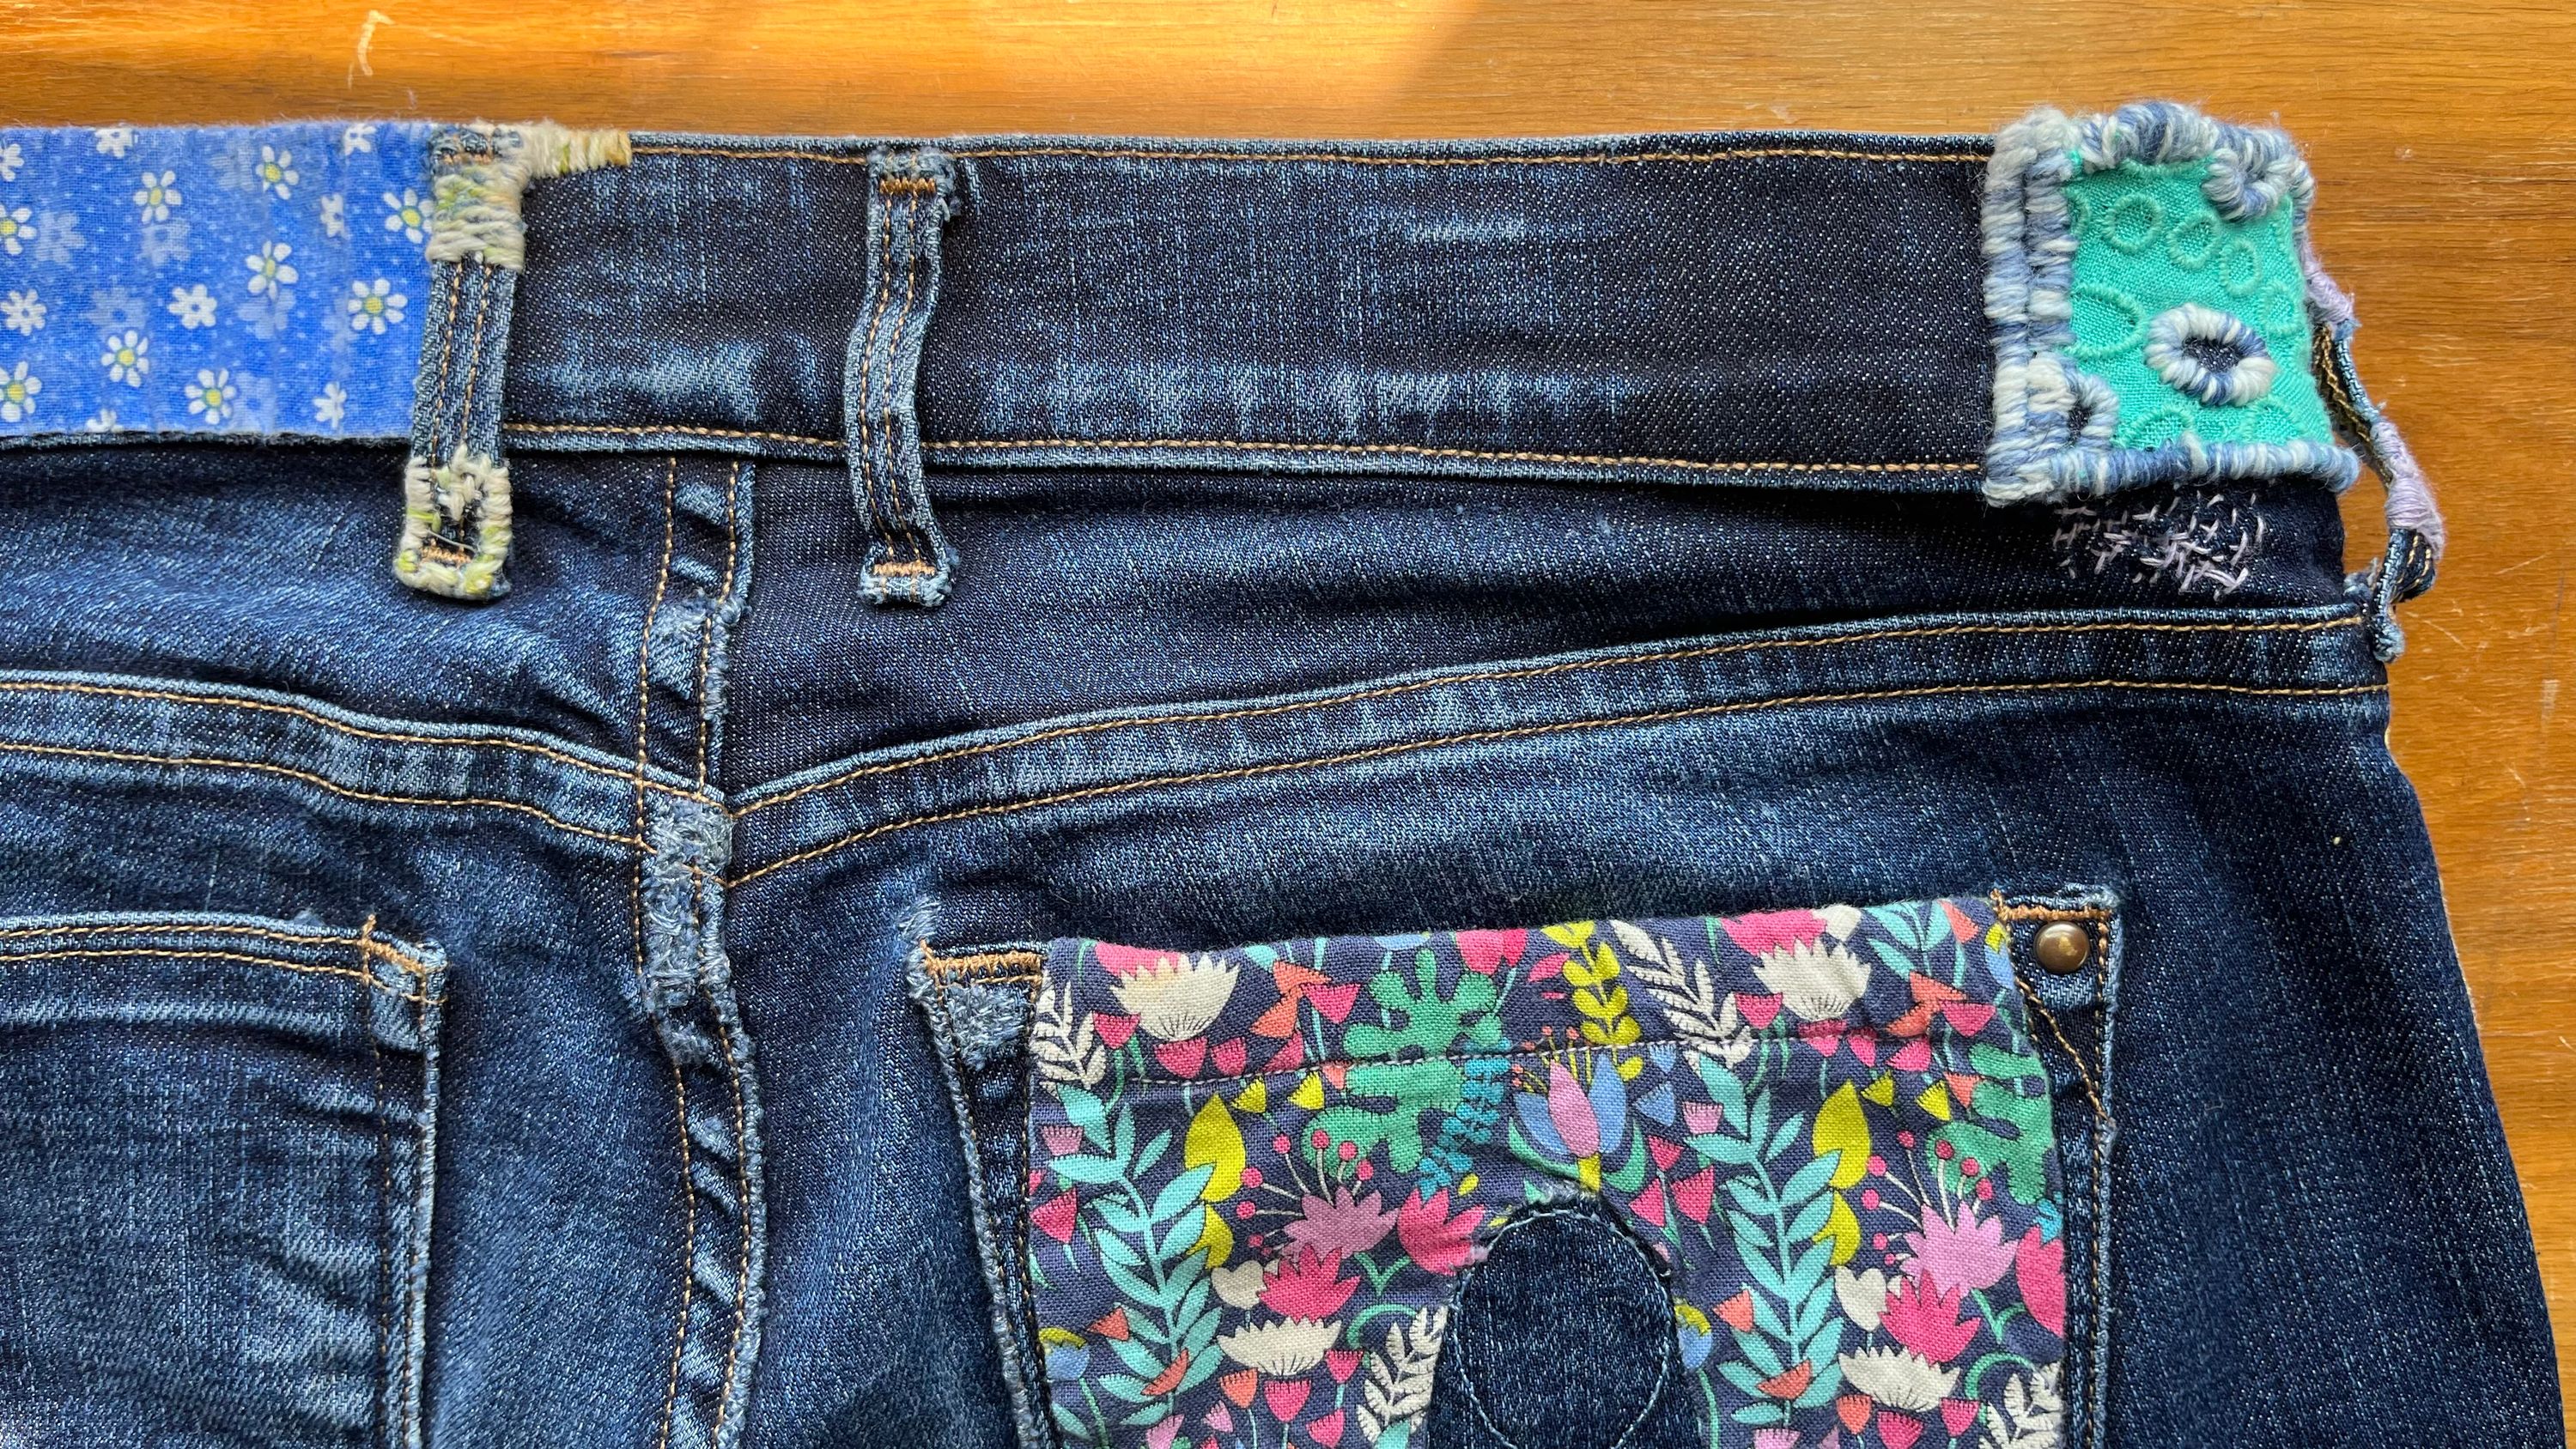 The waistband on the Work Jeans, mended with some stitches and colors.